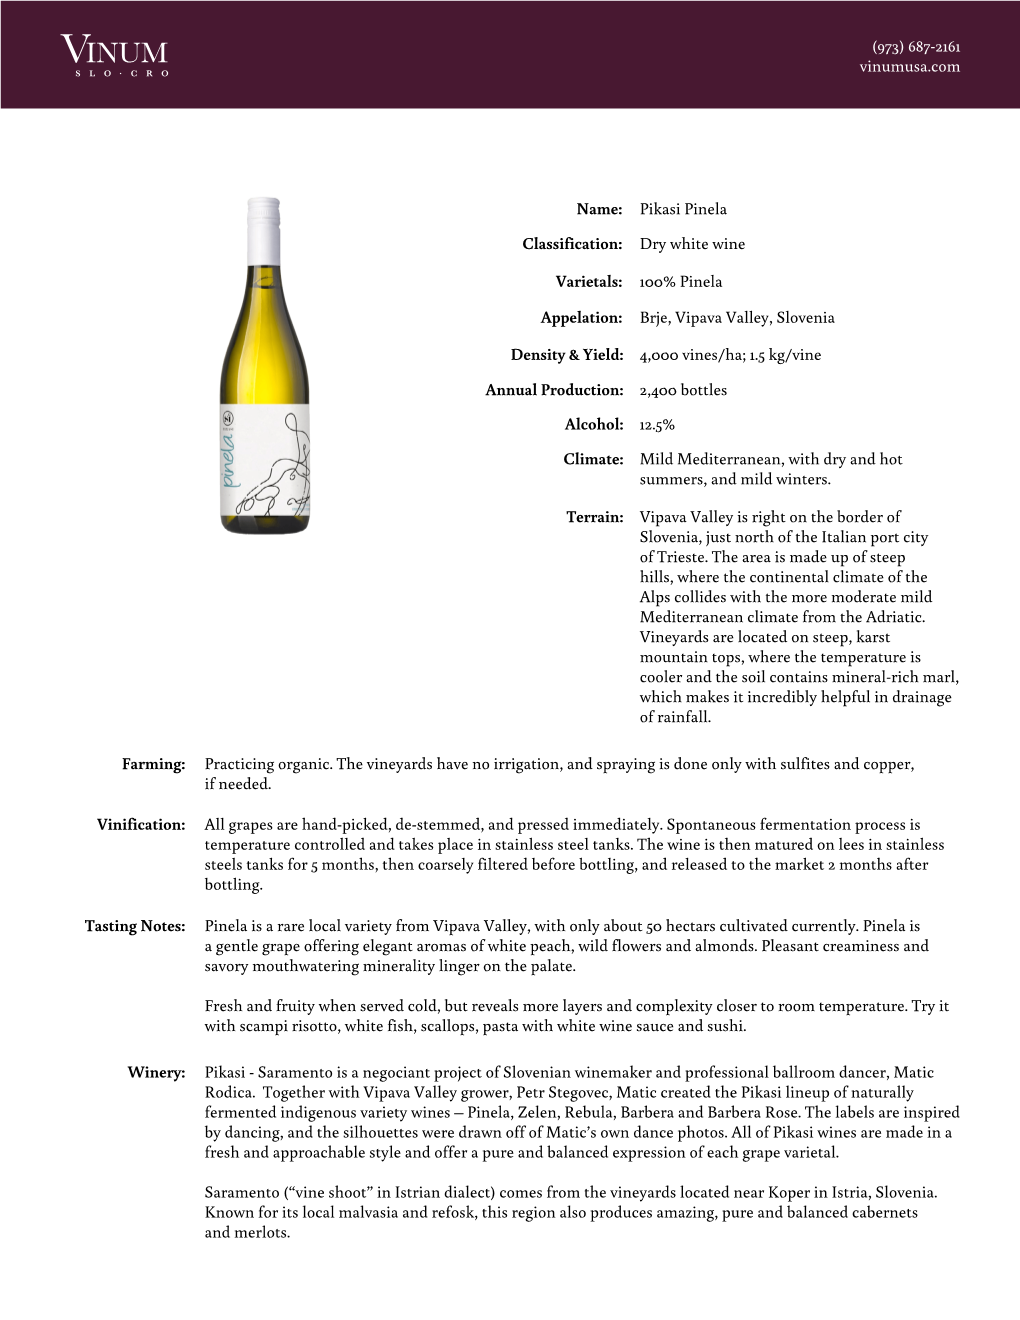 Tasting Notes: Winery